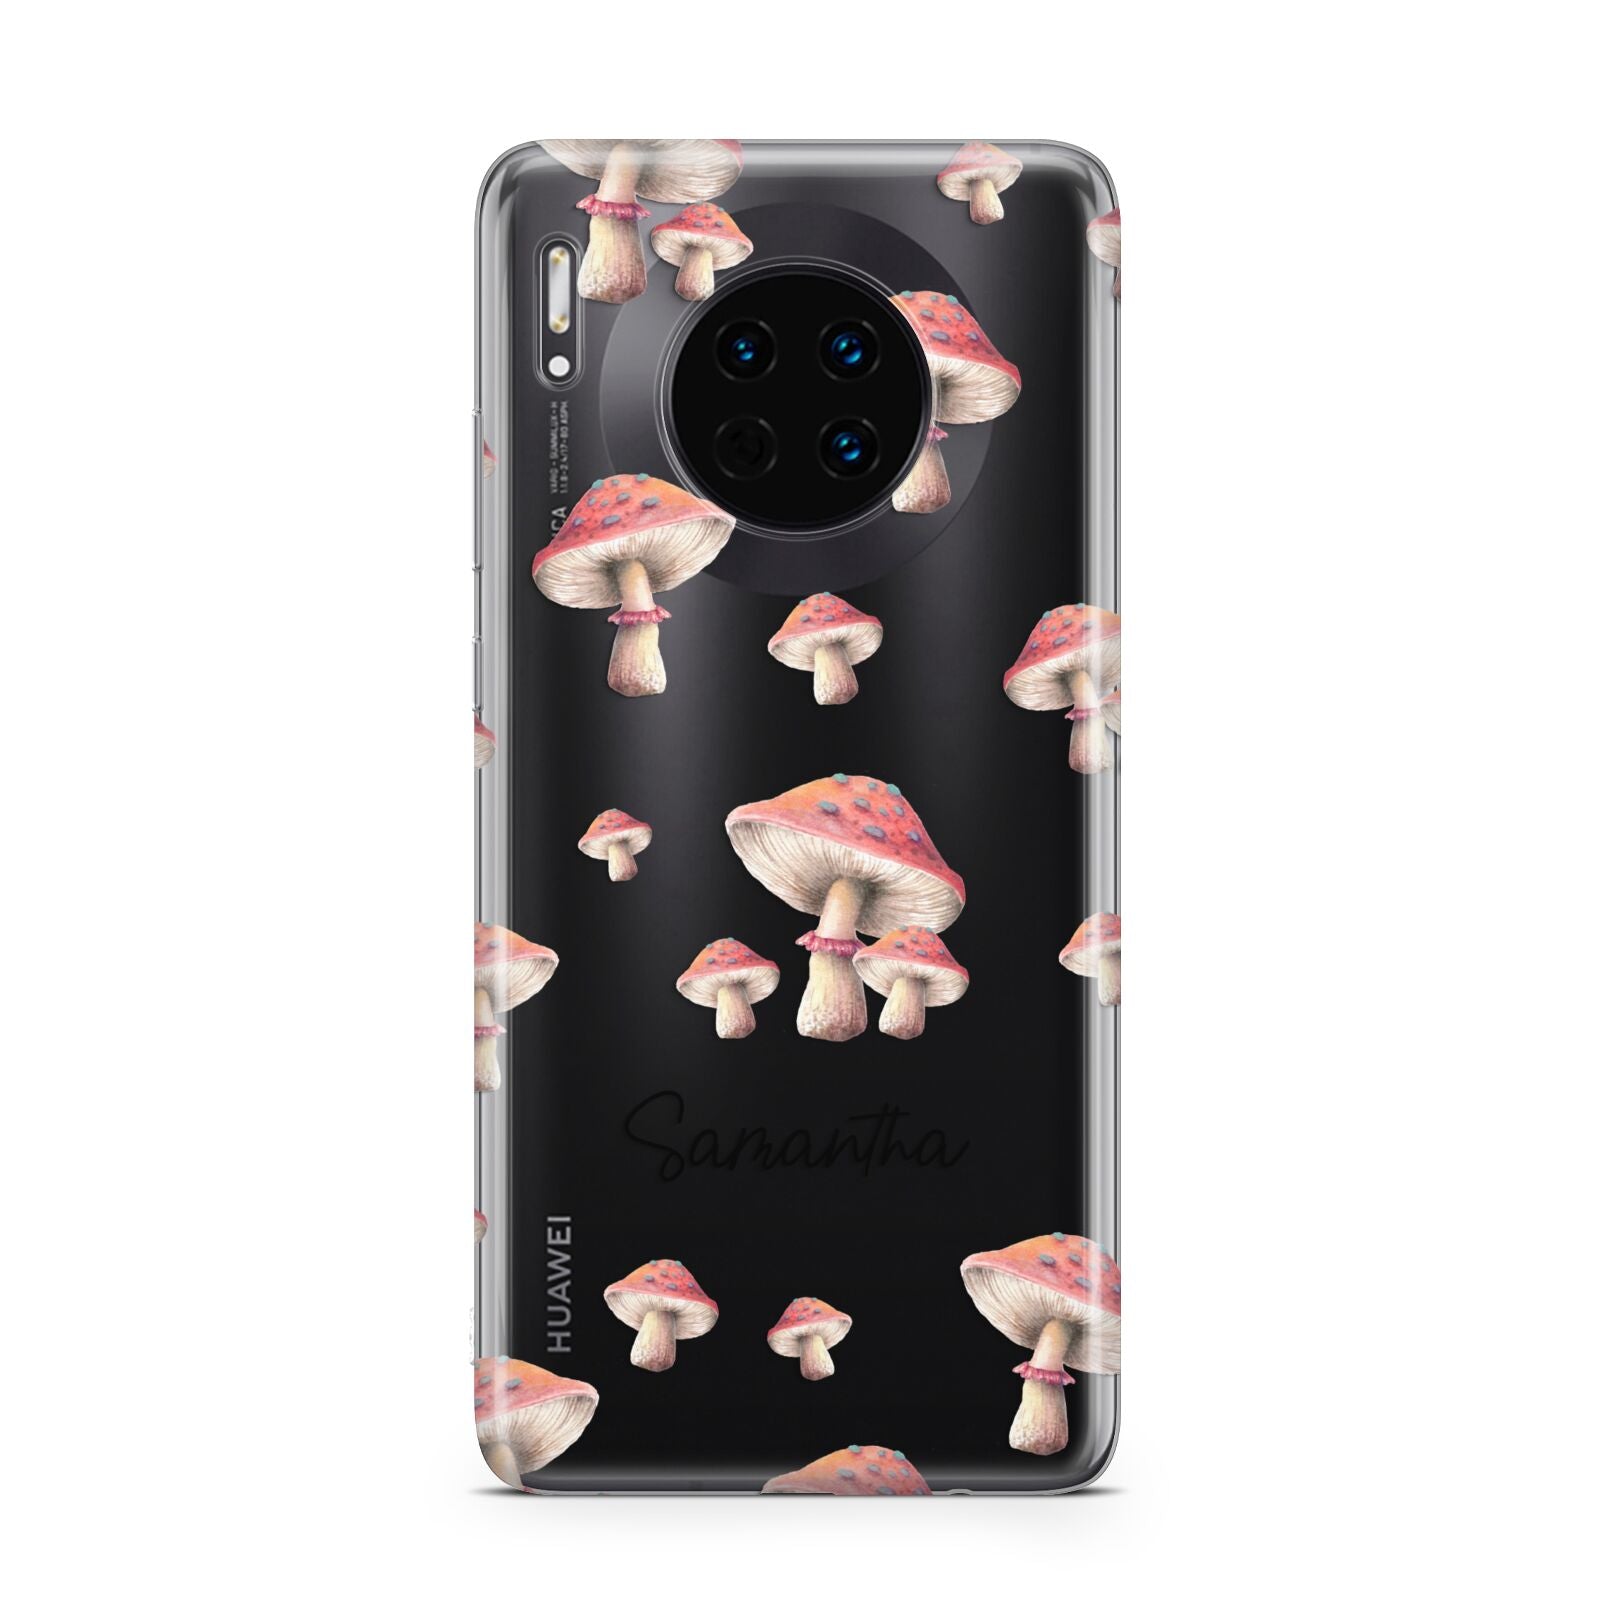 Mushroom Illustrations with Name Huawei Mate 30